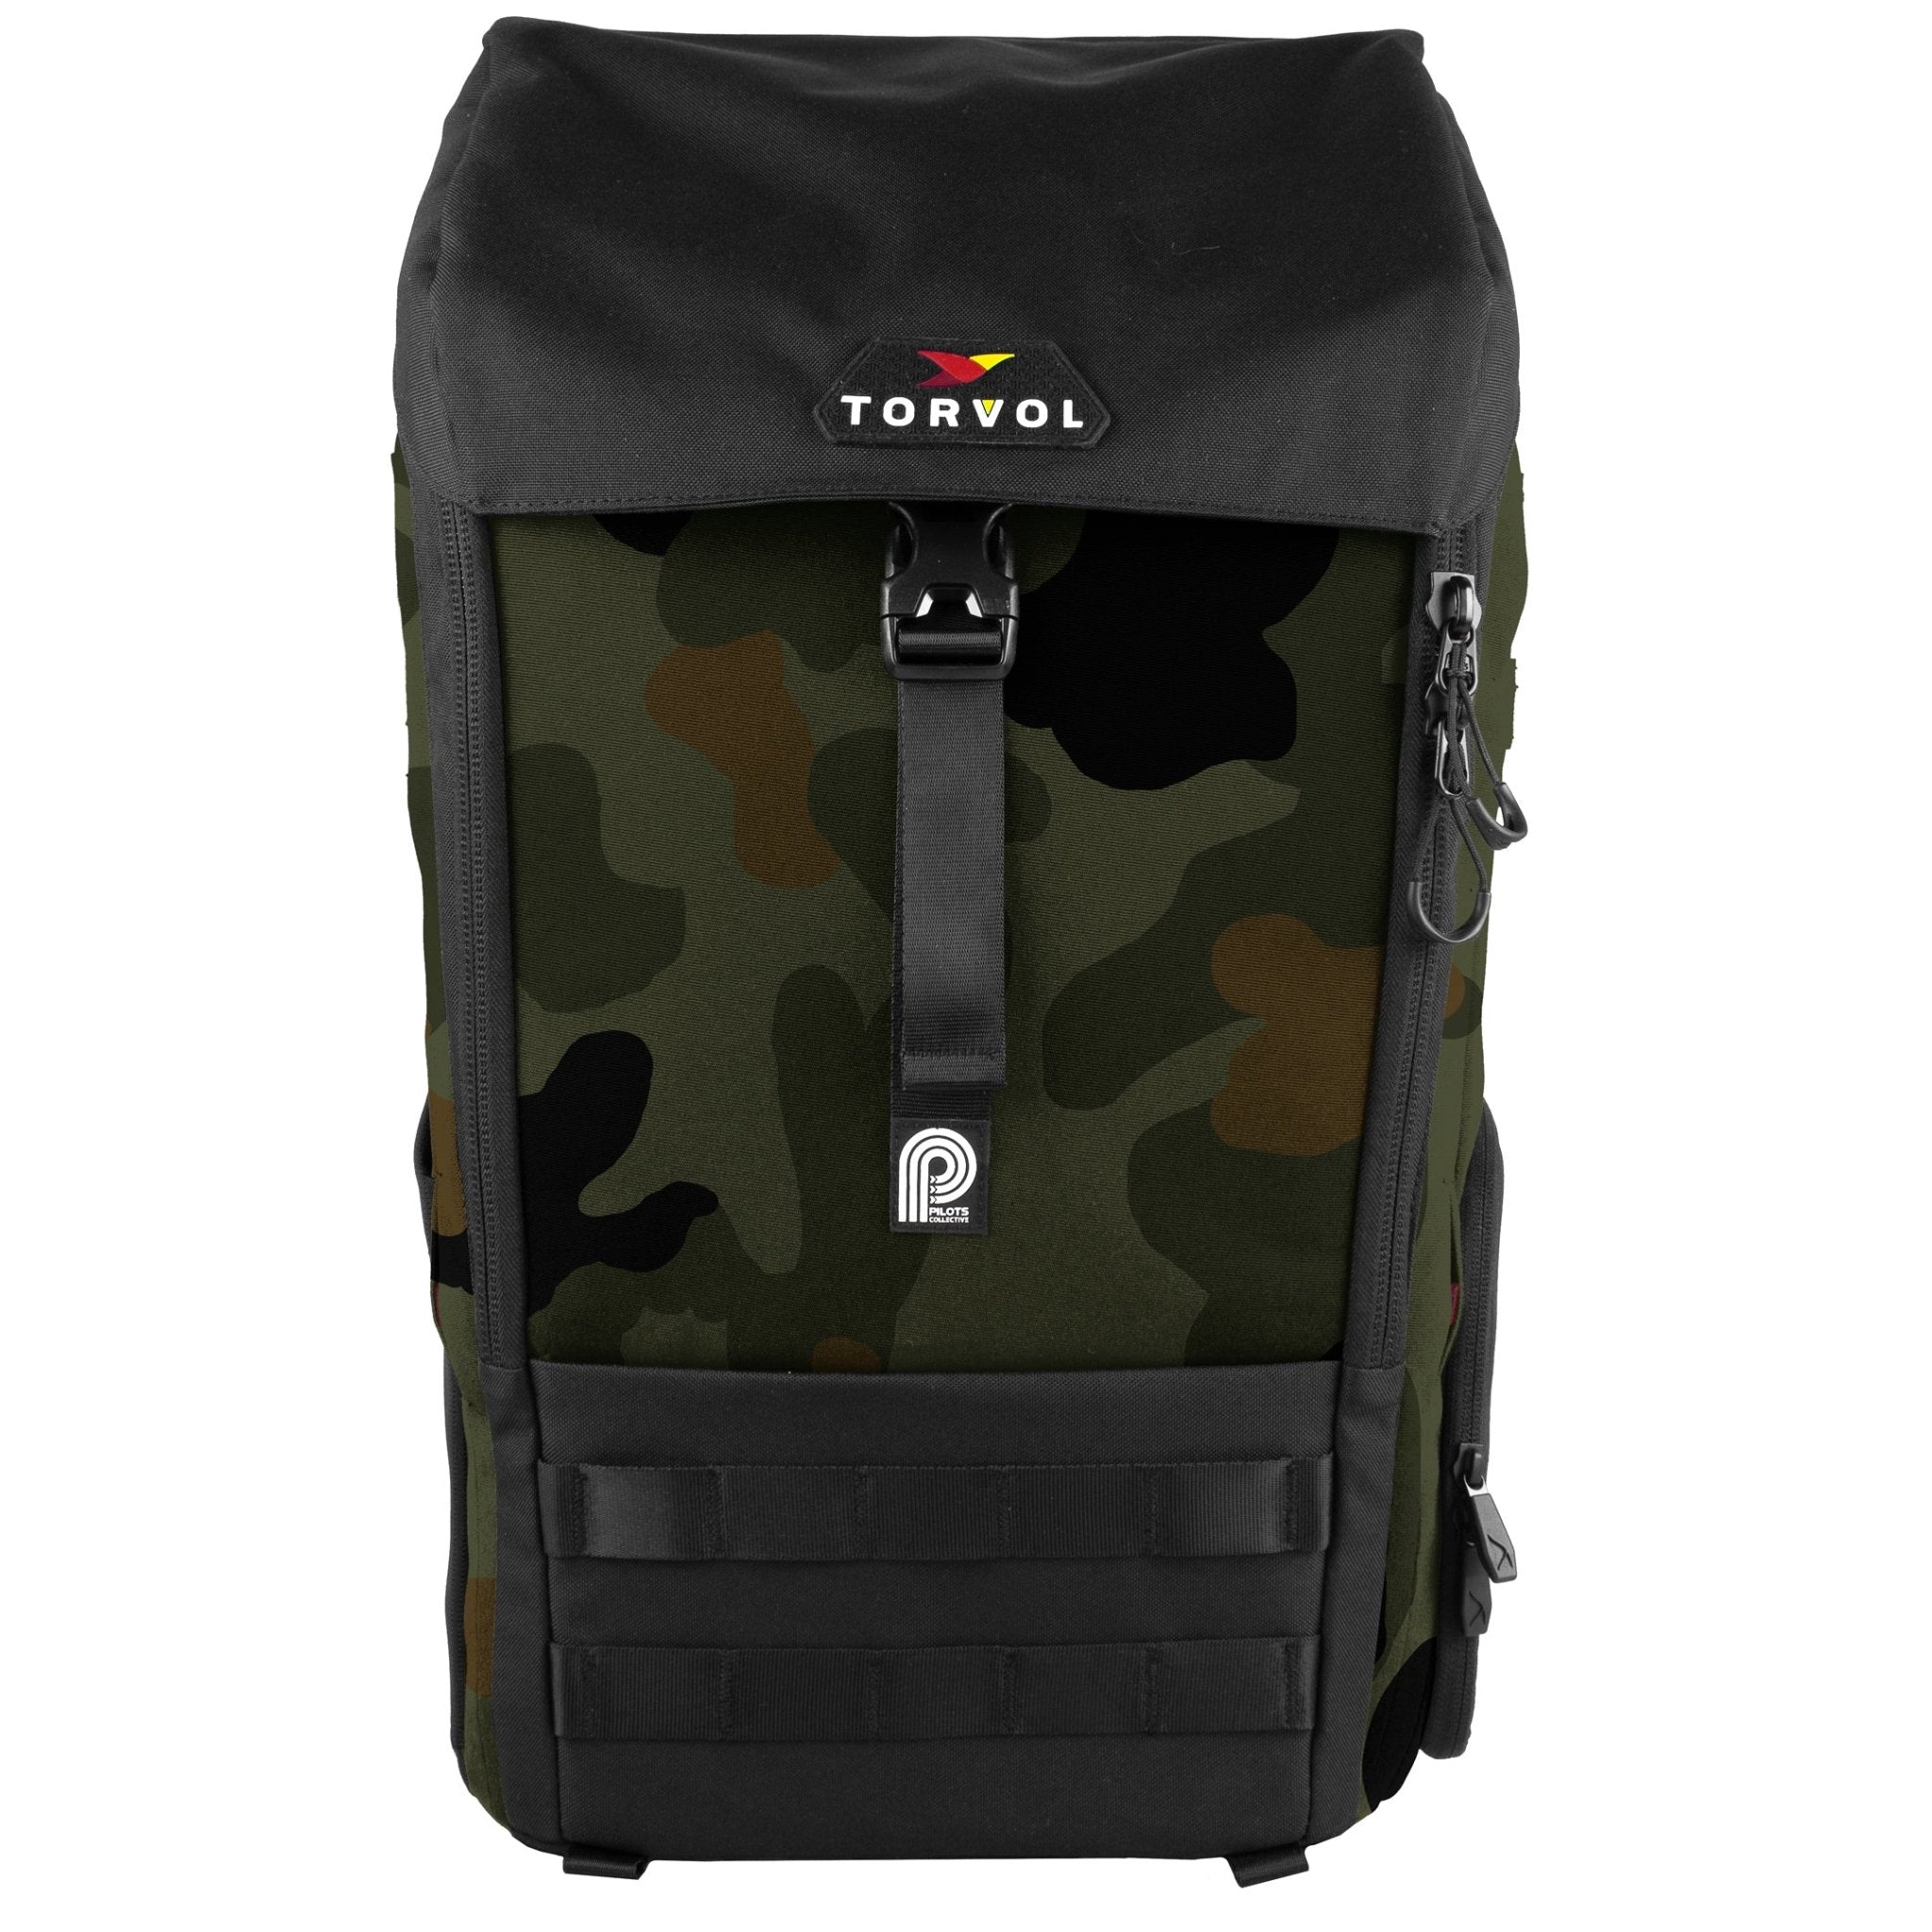 Torvol Urban Carrier Backpack - Your All-Round Freestyle Backpack 23 - Torvol - Drone Authority